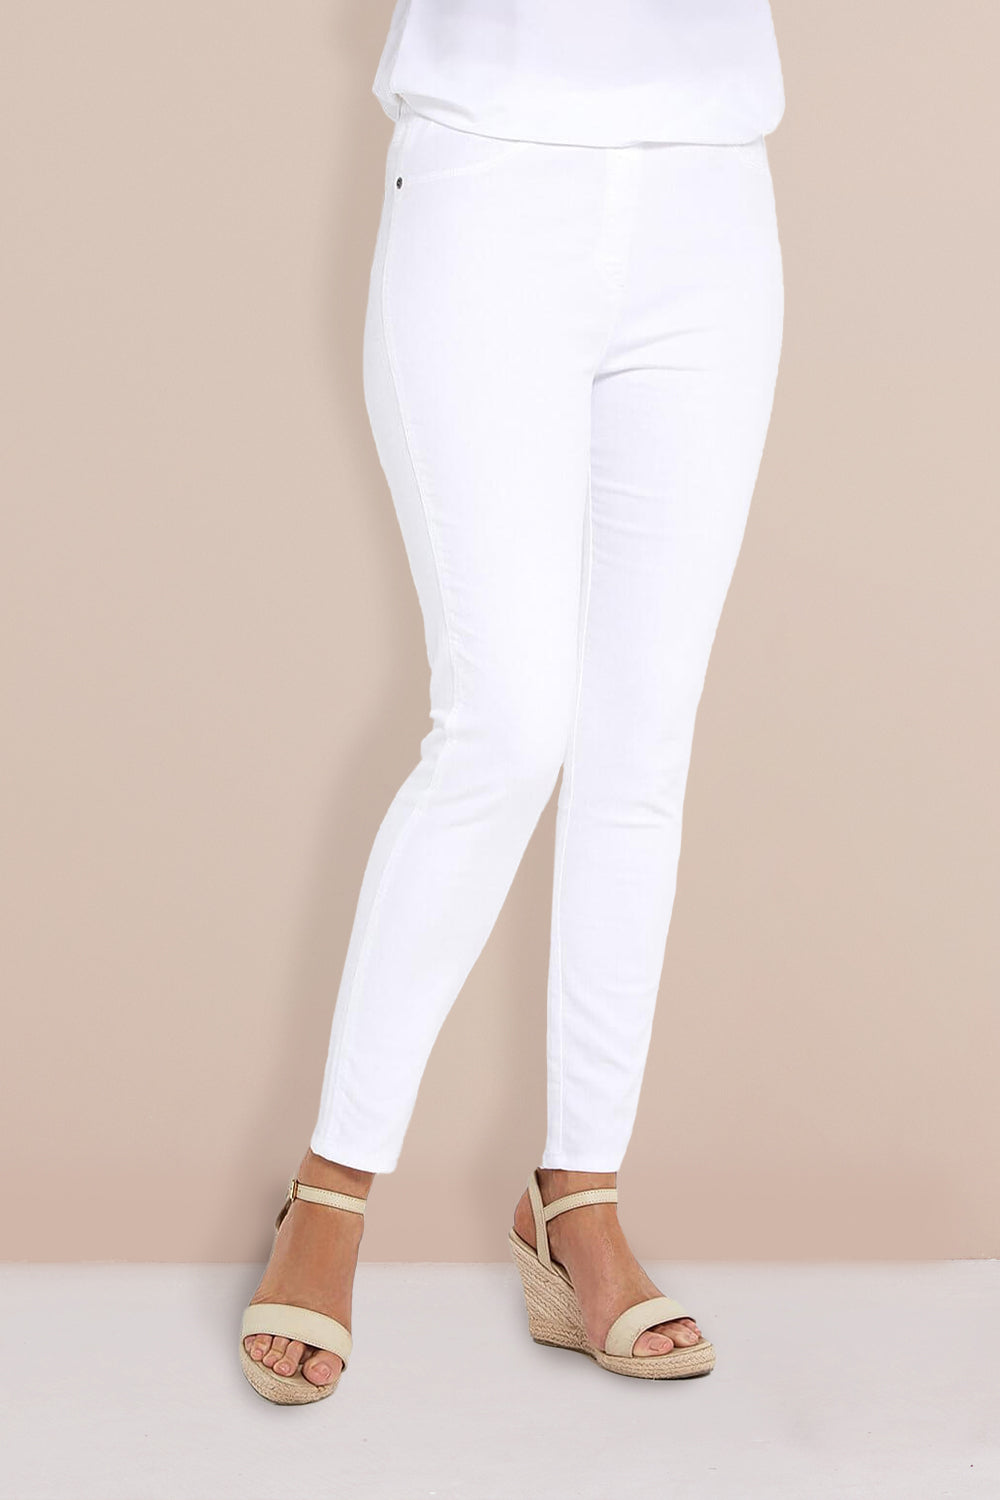 cream jeggings, cream jeggings Suppliers and Manufacturers at